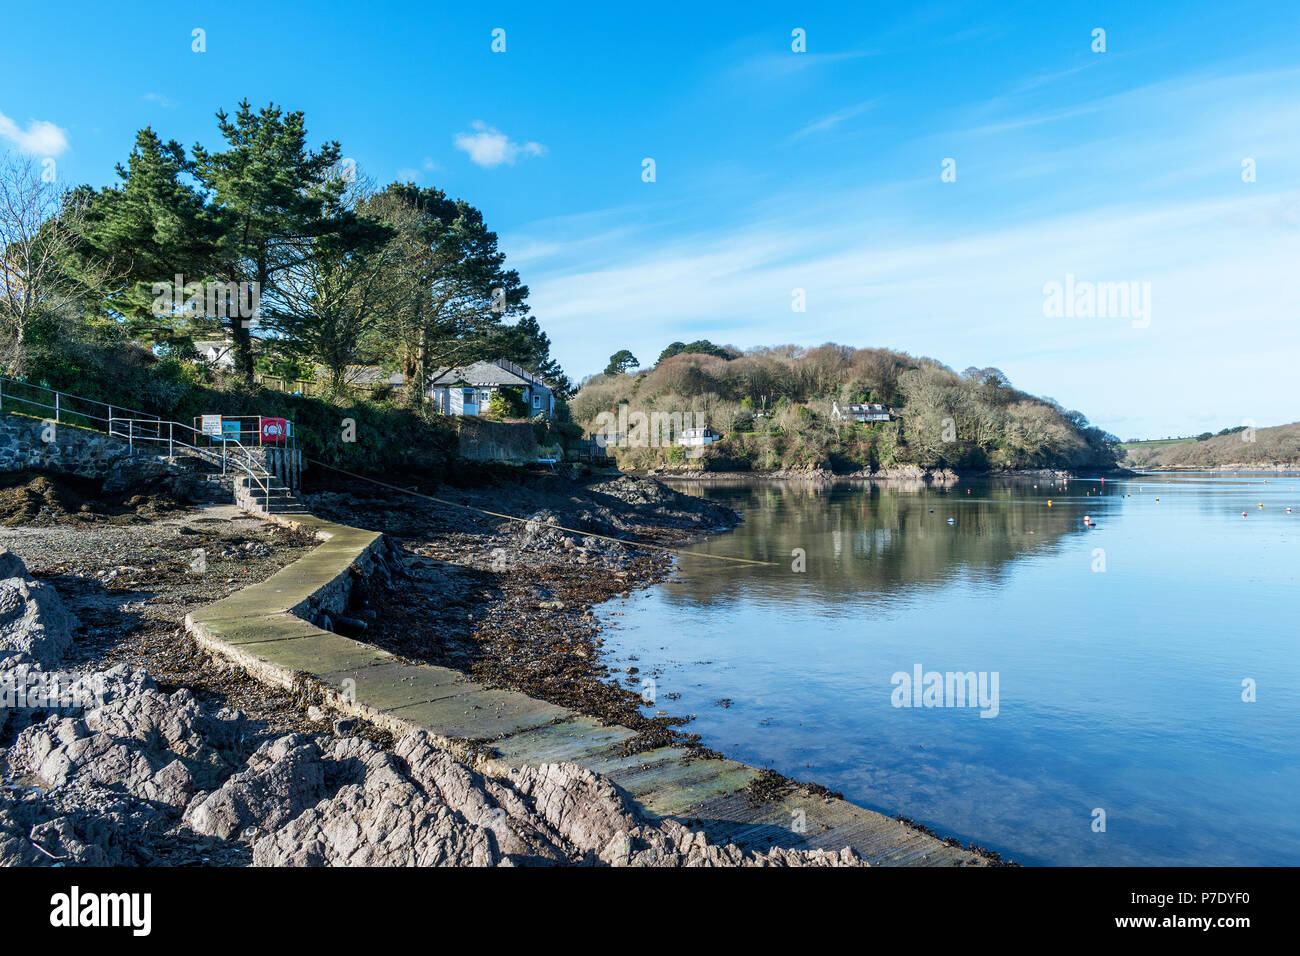 ferry jetty landing stage on the helford river in cornwall, england, britain, uk. Stock Photo